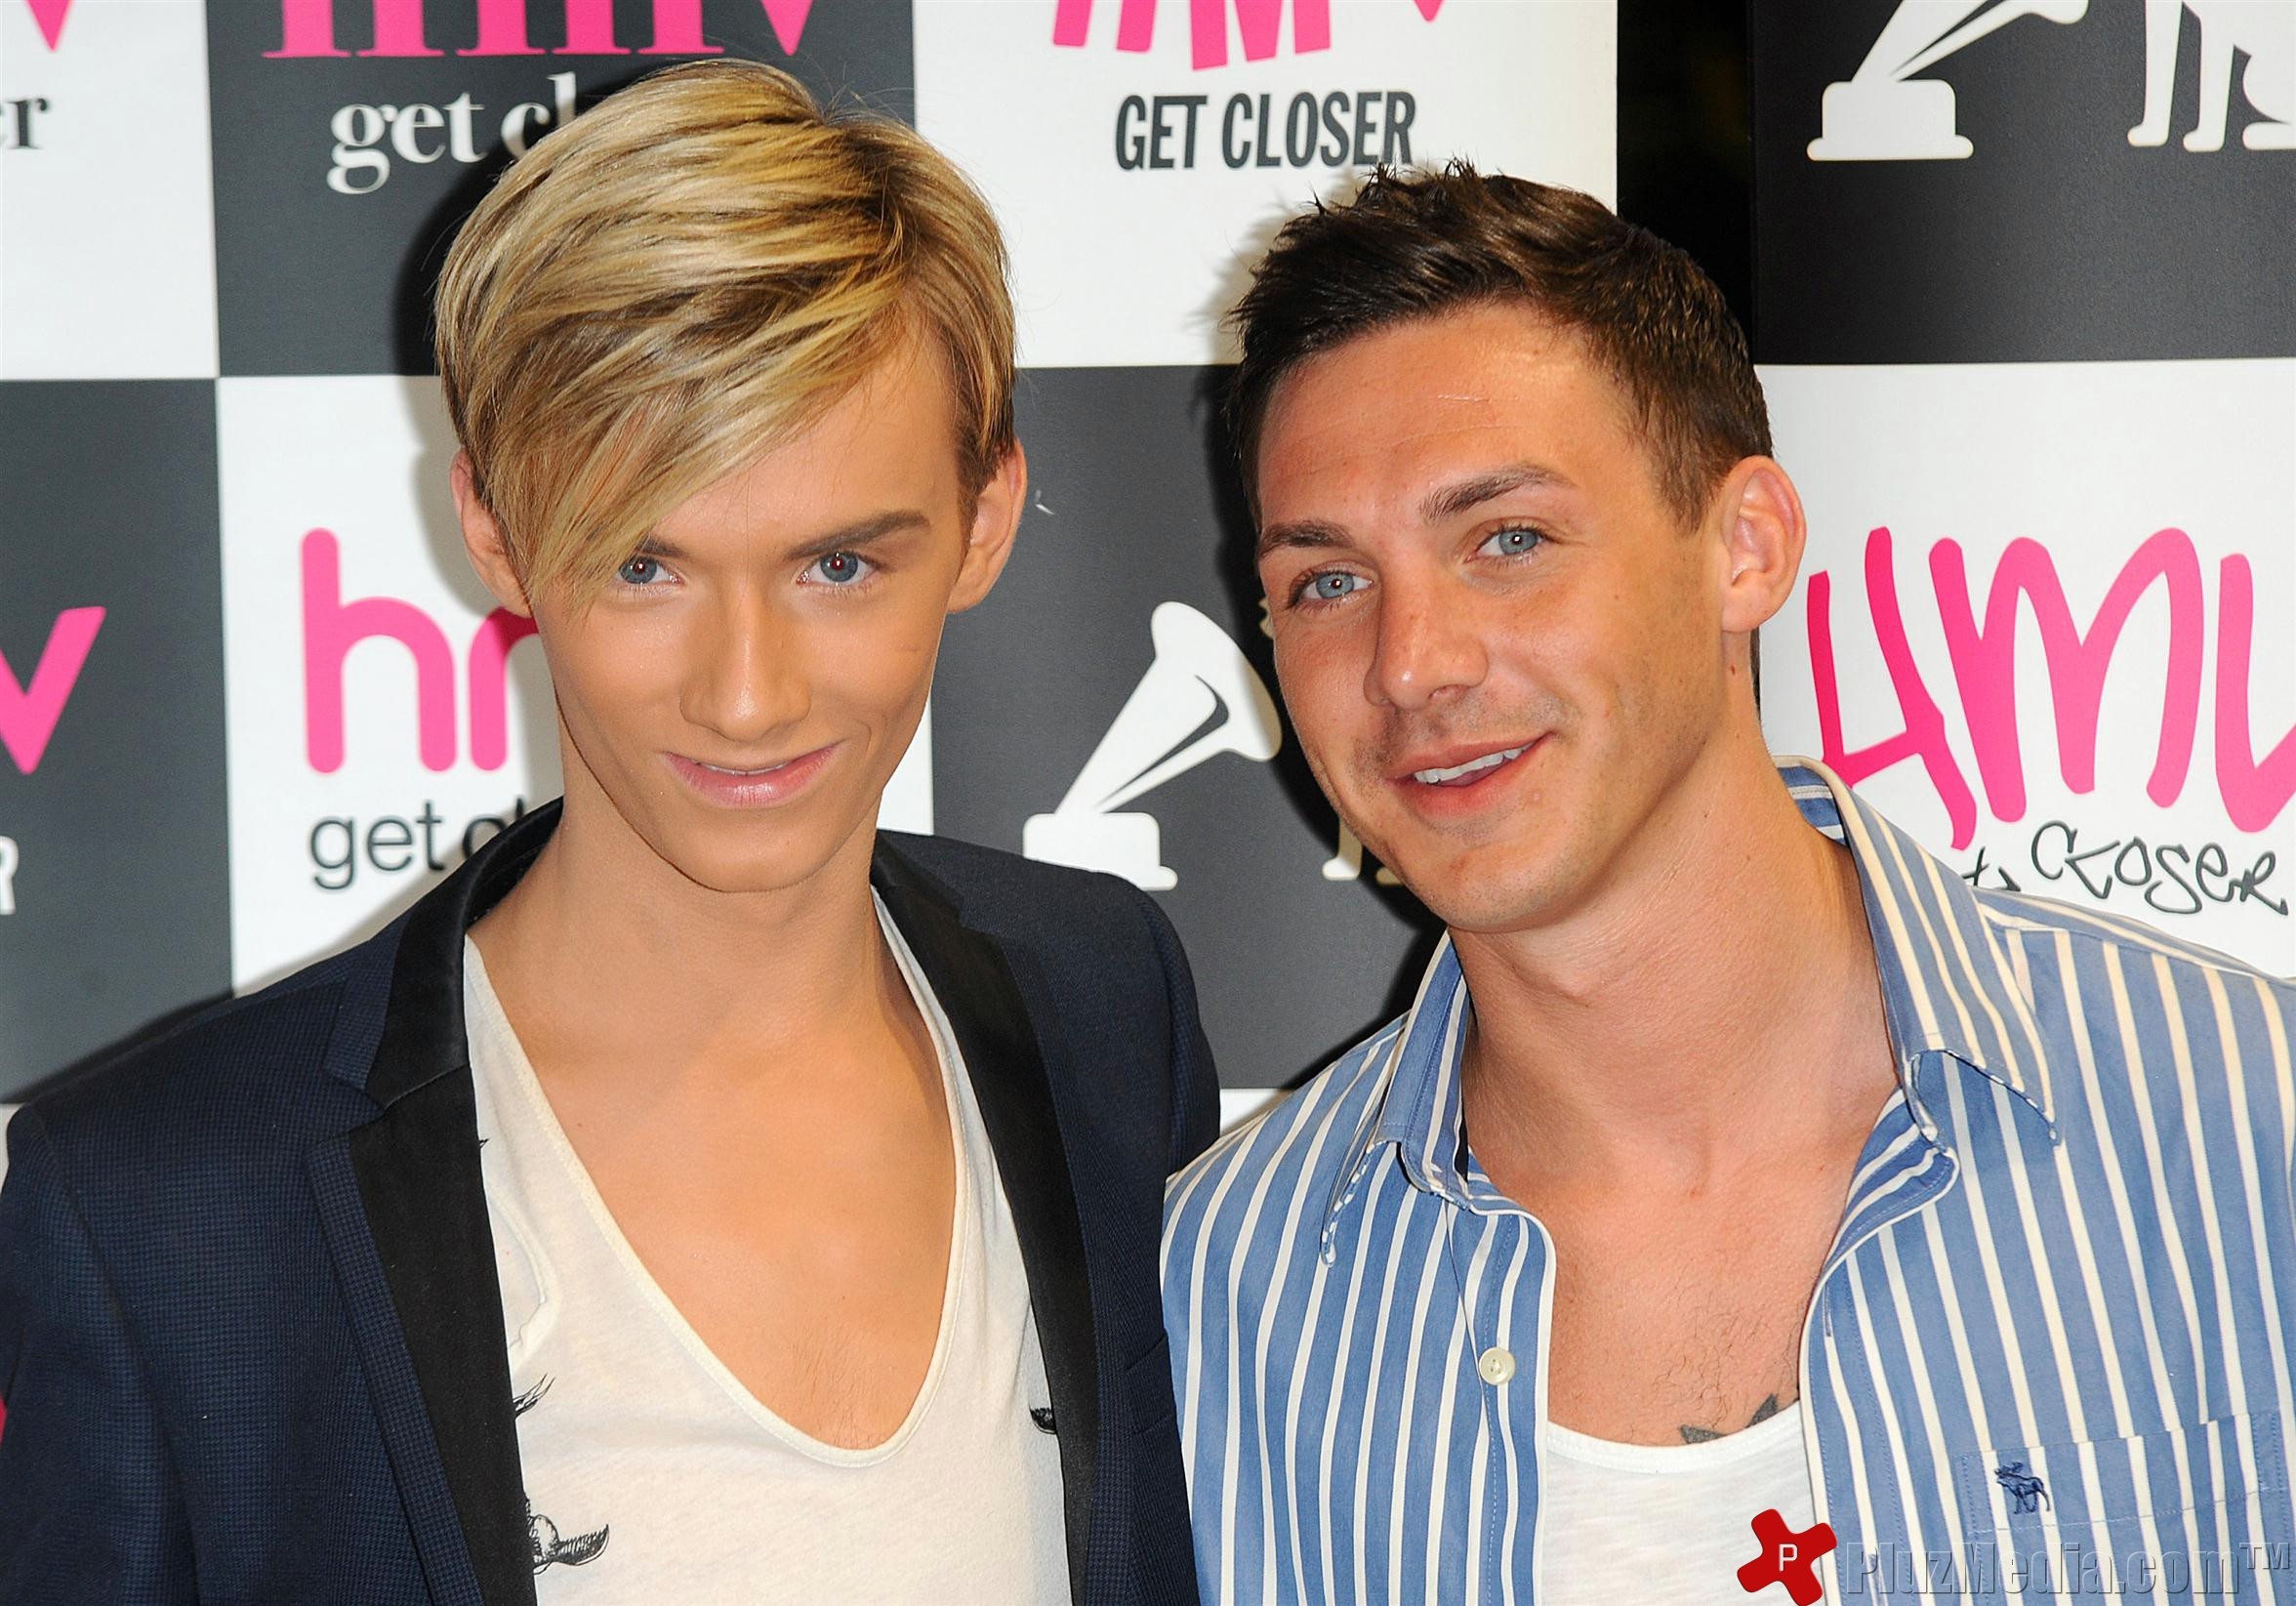 'TOWIE' cast signing copies of the new DVD 'The Only Way is Essex' | Picture 89574